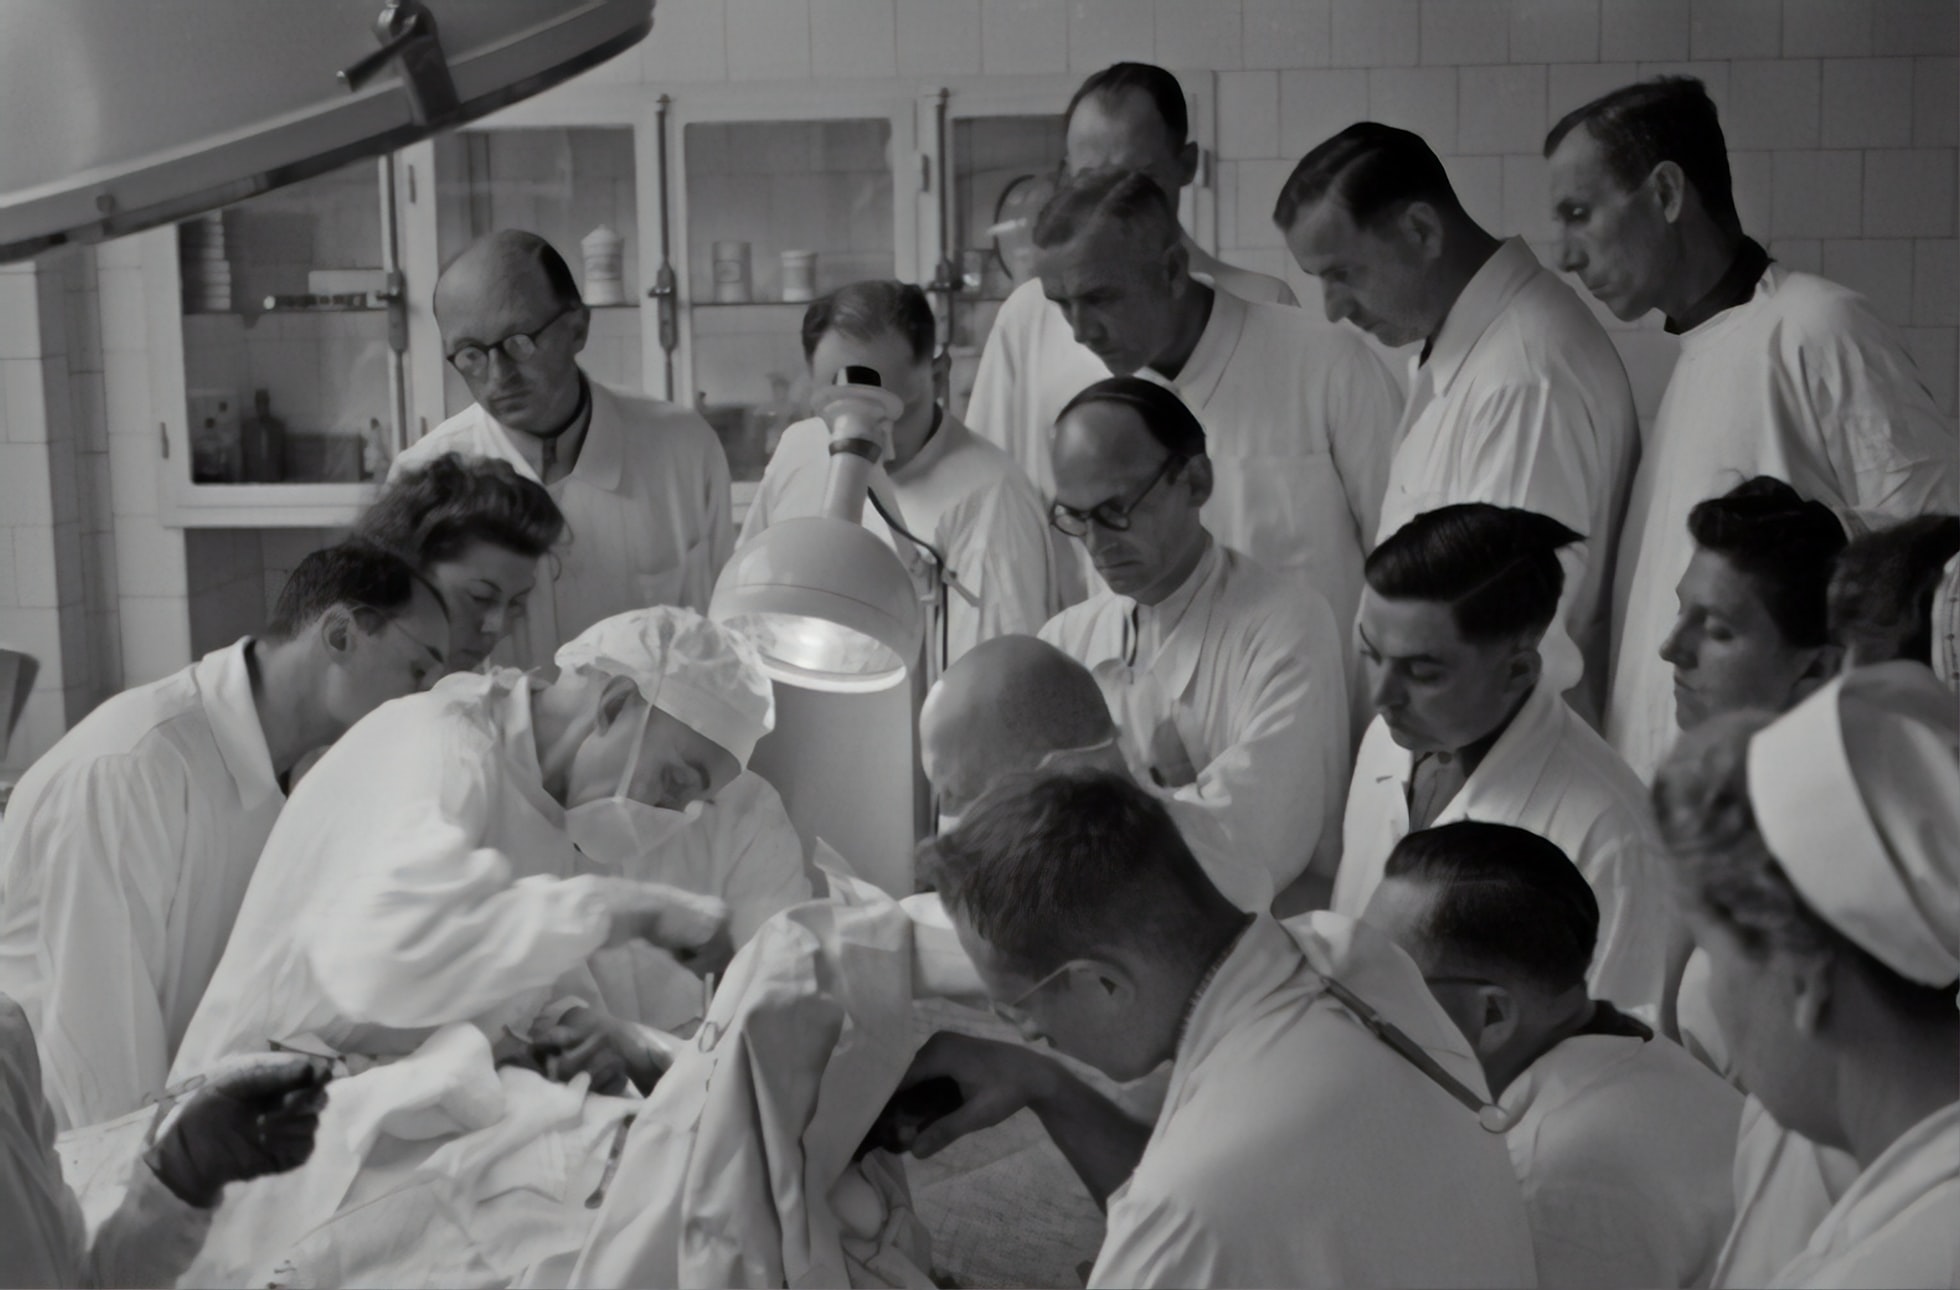 Old Image of a surgery with a dozen of people around the patient and watching